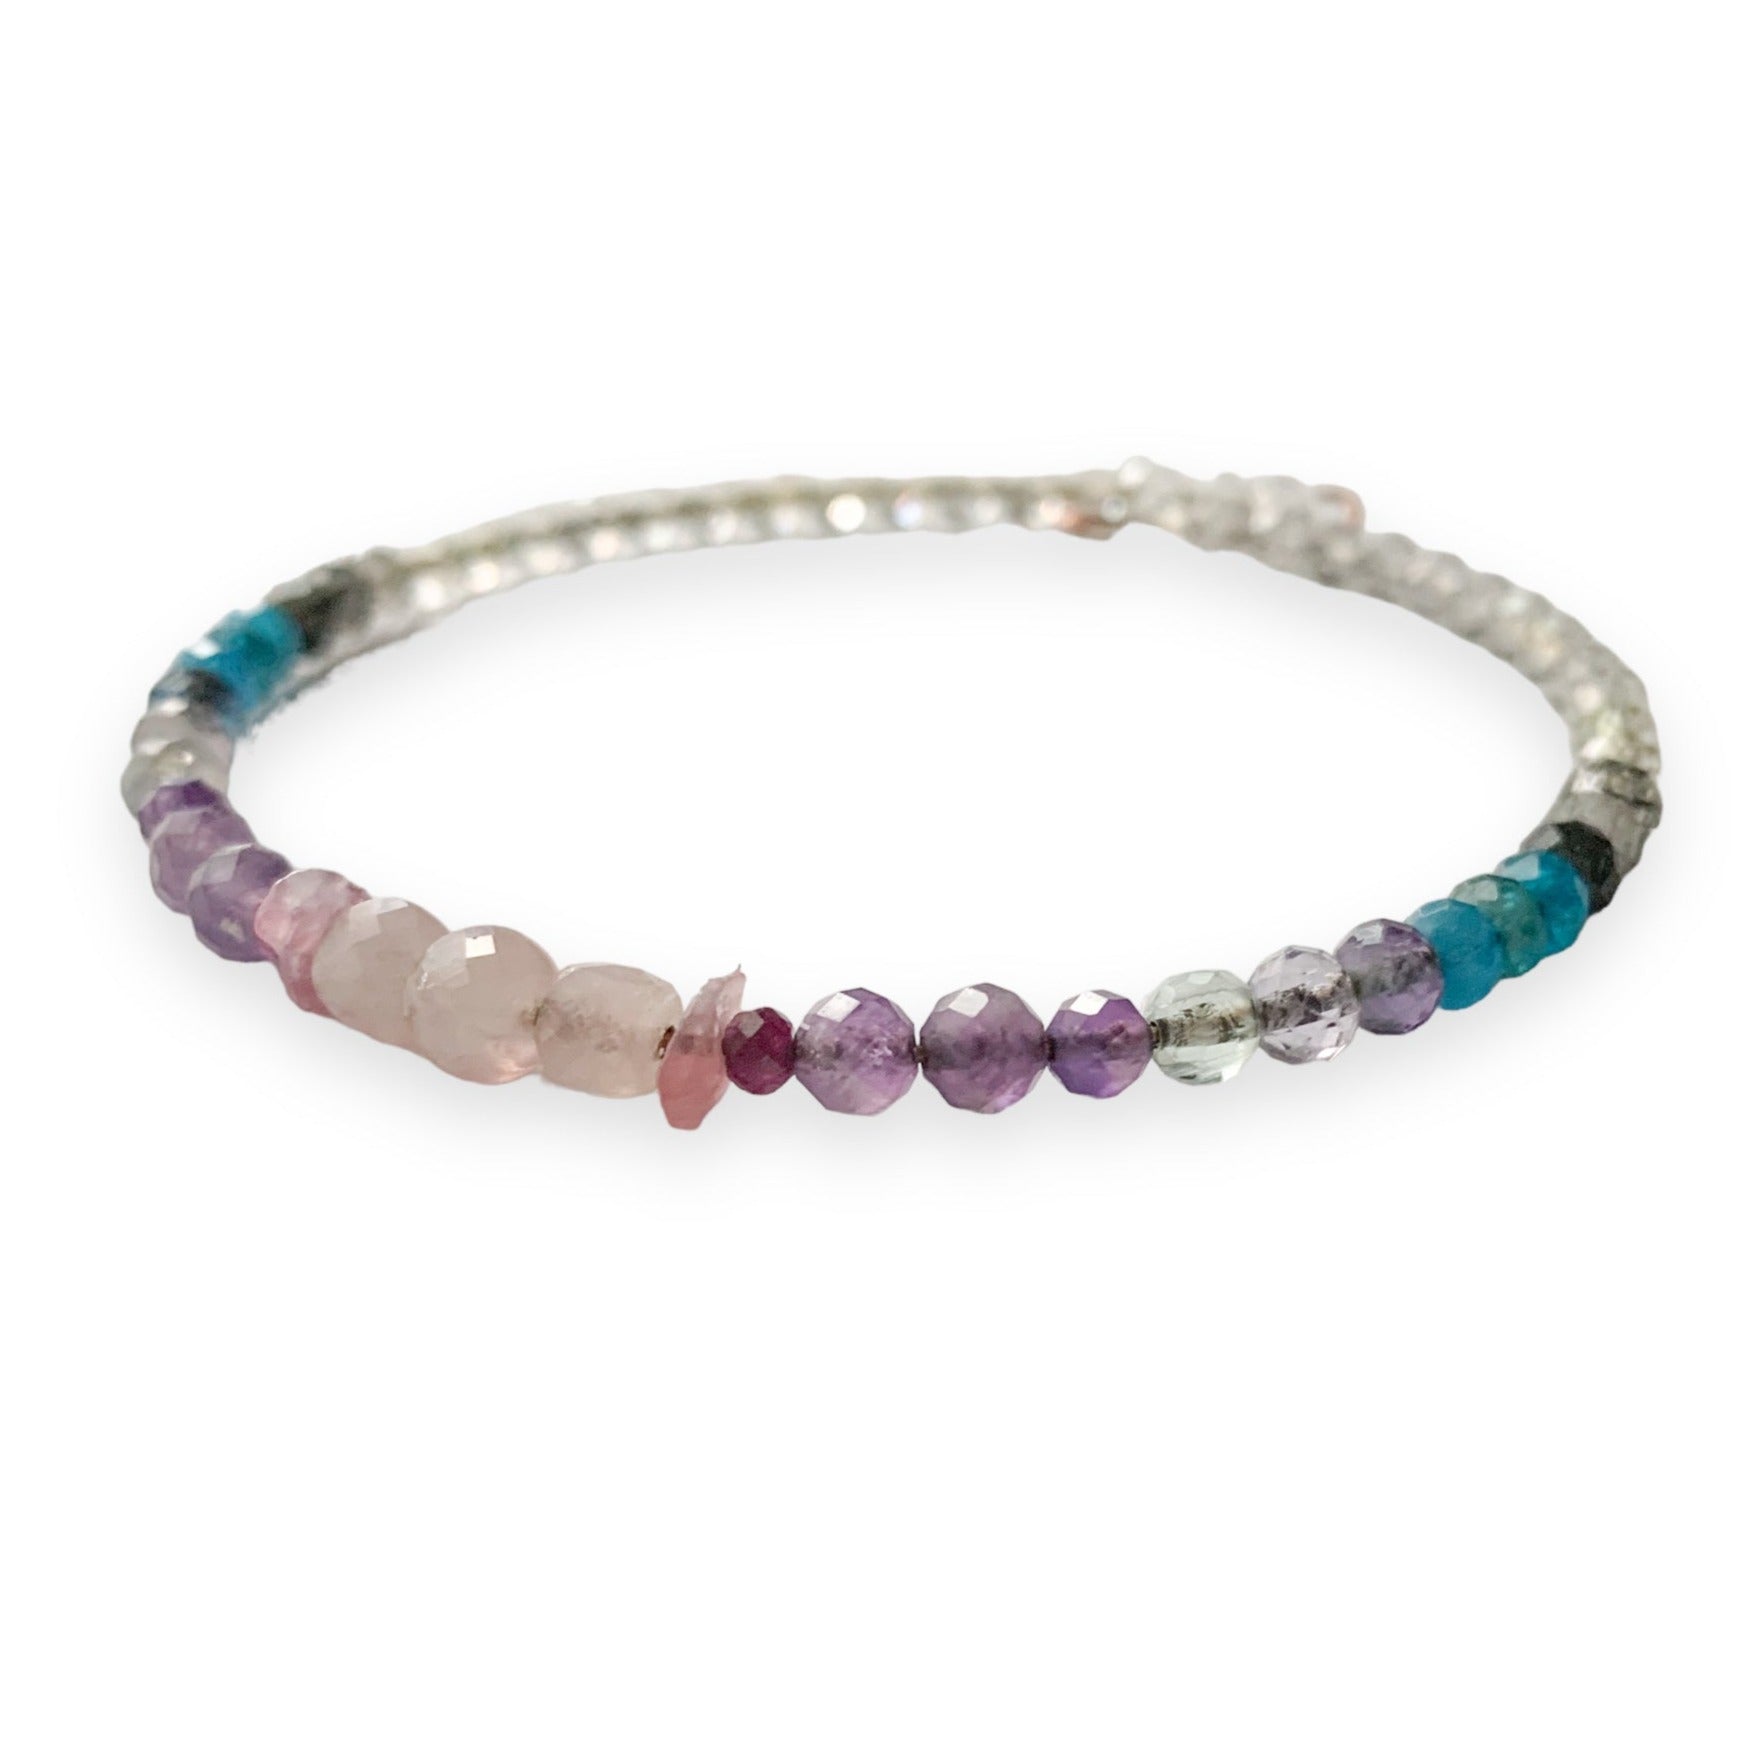 Close-up of Serenity Wrap Crystal Bracelet with Rose Quartz and Amethyst